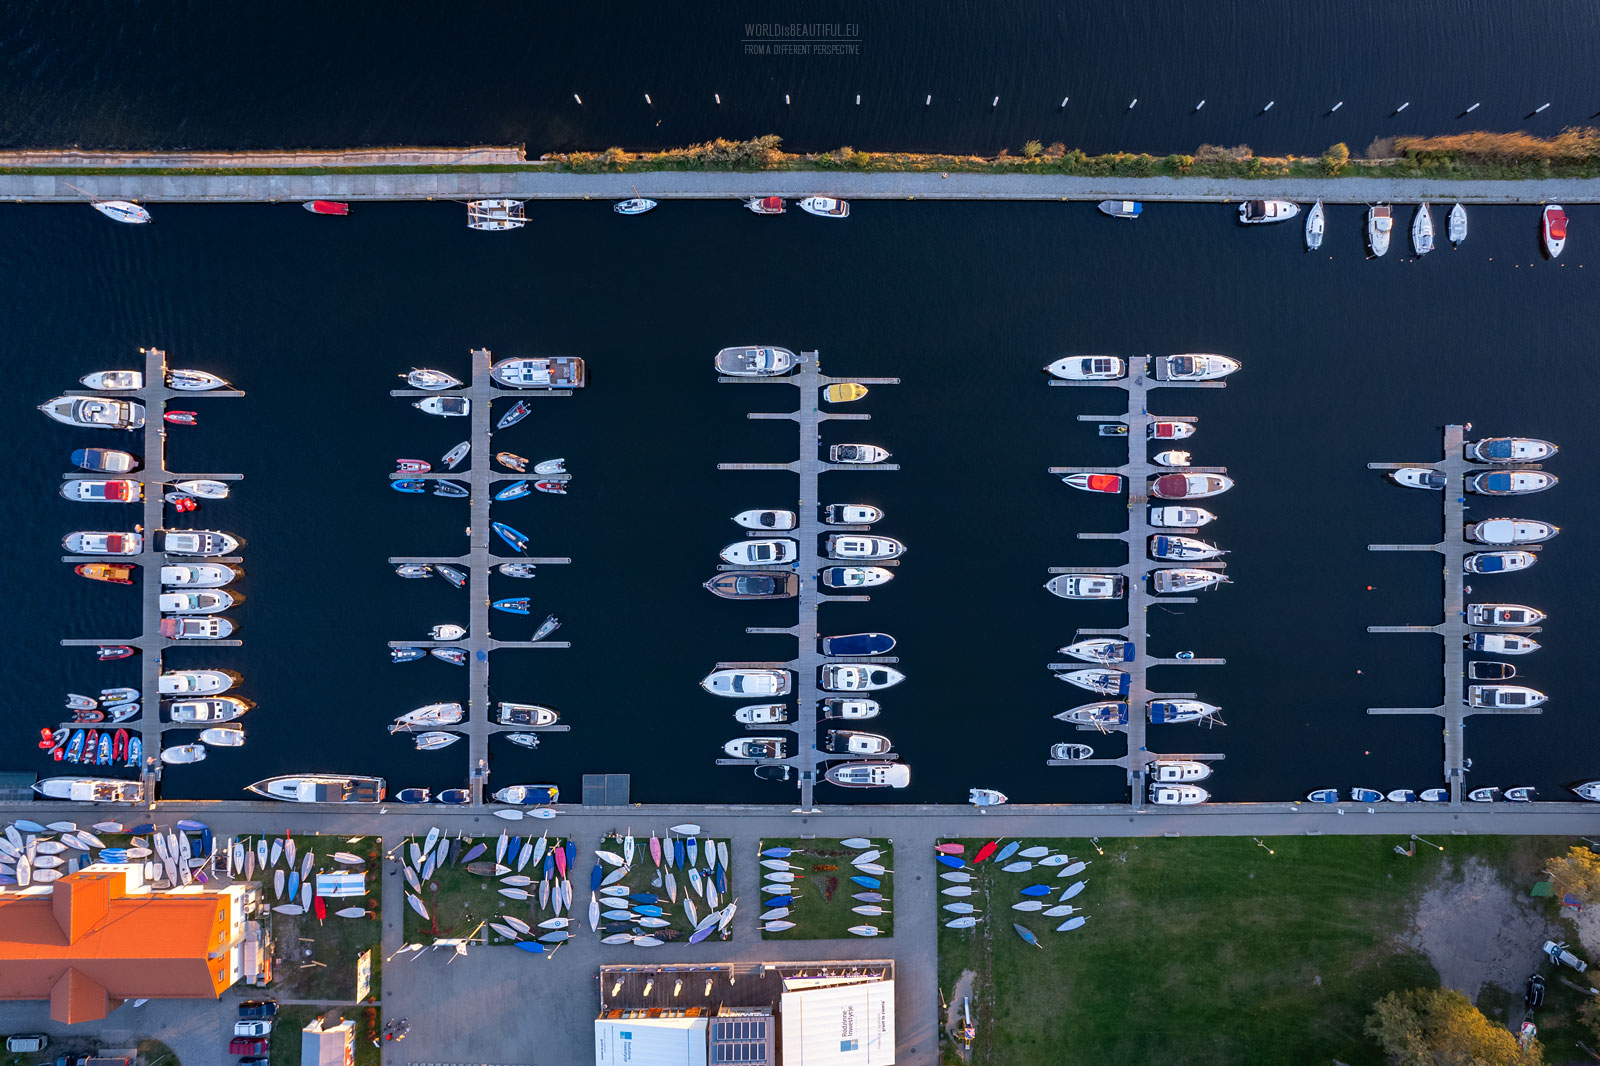 Yacht harbor from a bird's eye view